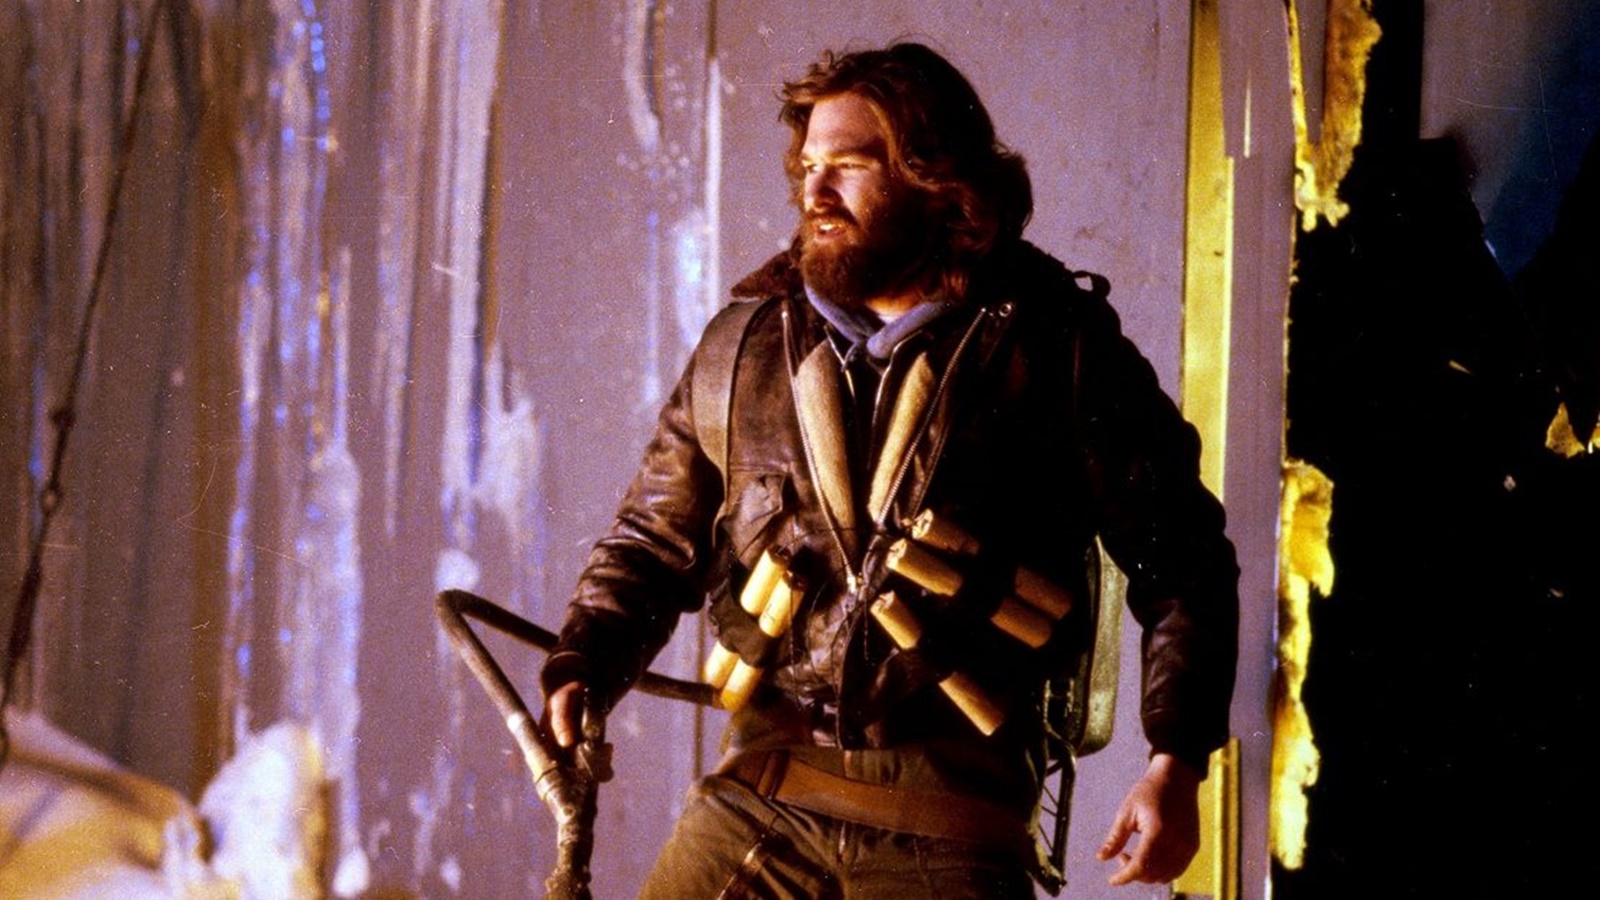 The Thing 2: John Carpenter reveals that the sequel could be made